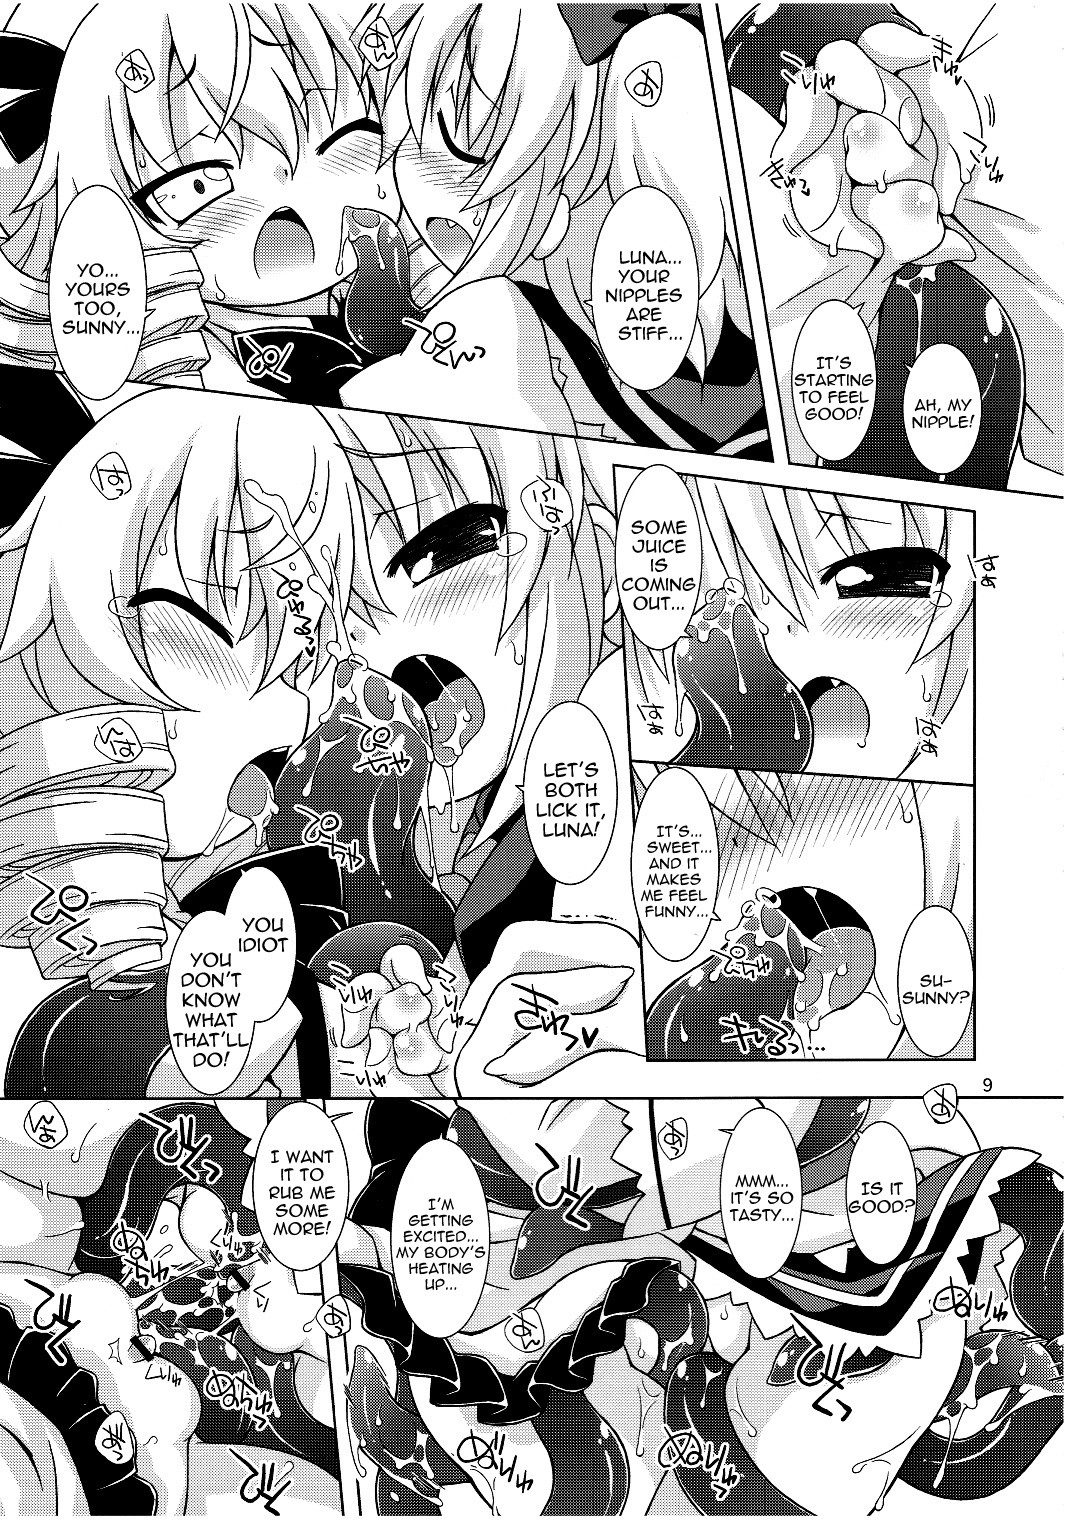 Sweet Lovely Syrup hentai manga picture 6